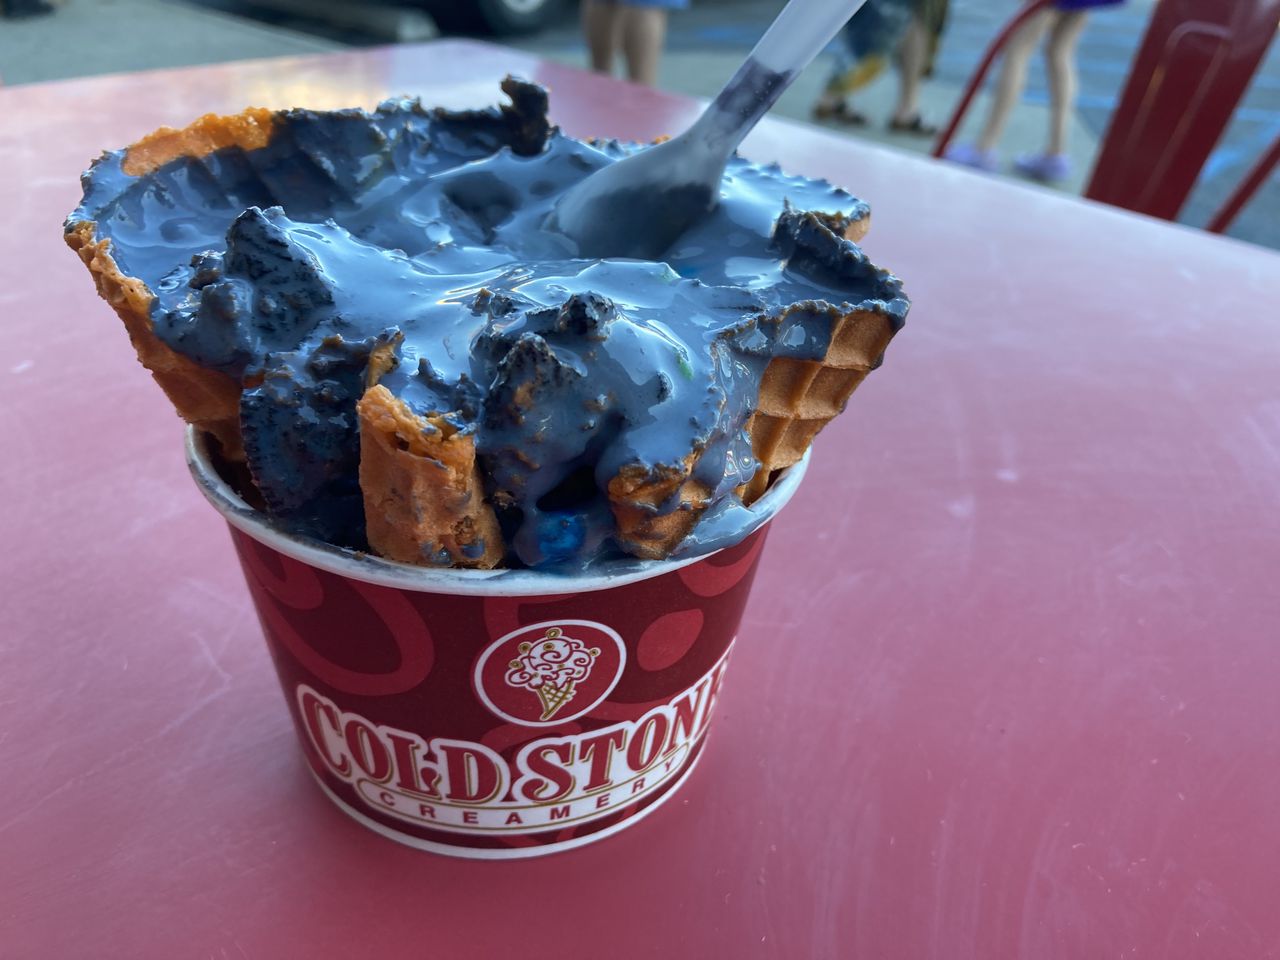 Black ice cream for Halloween? We tried Cold Stone’s Boo Batter so you don’t have to